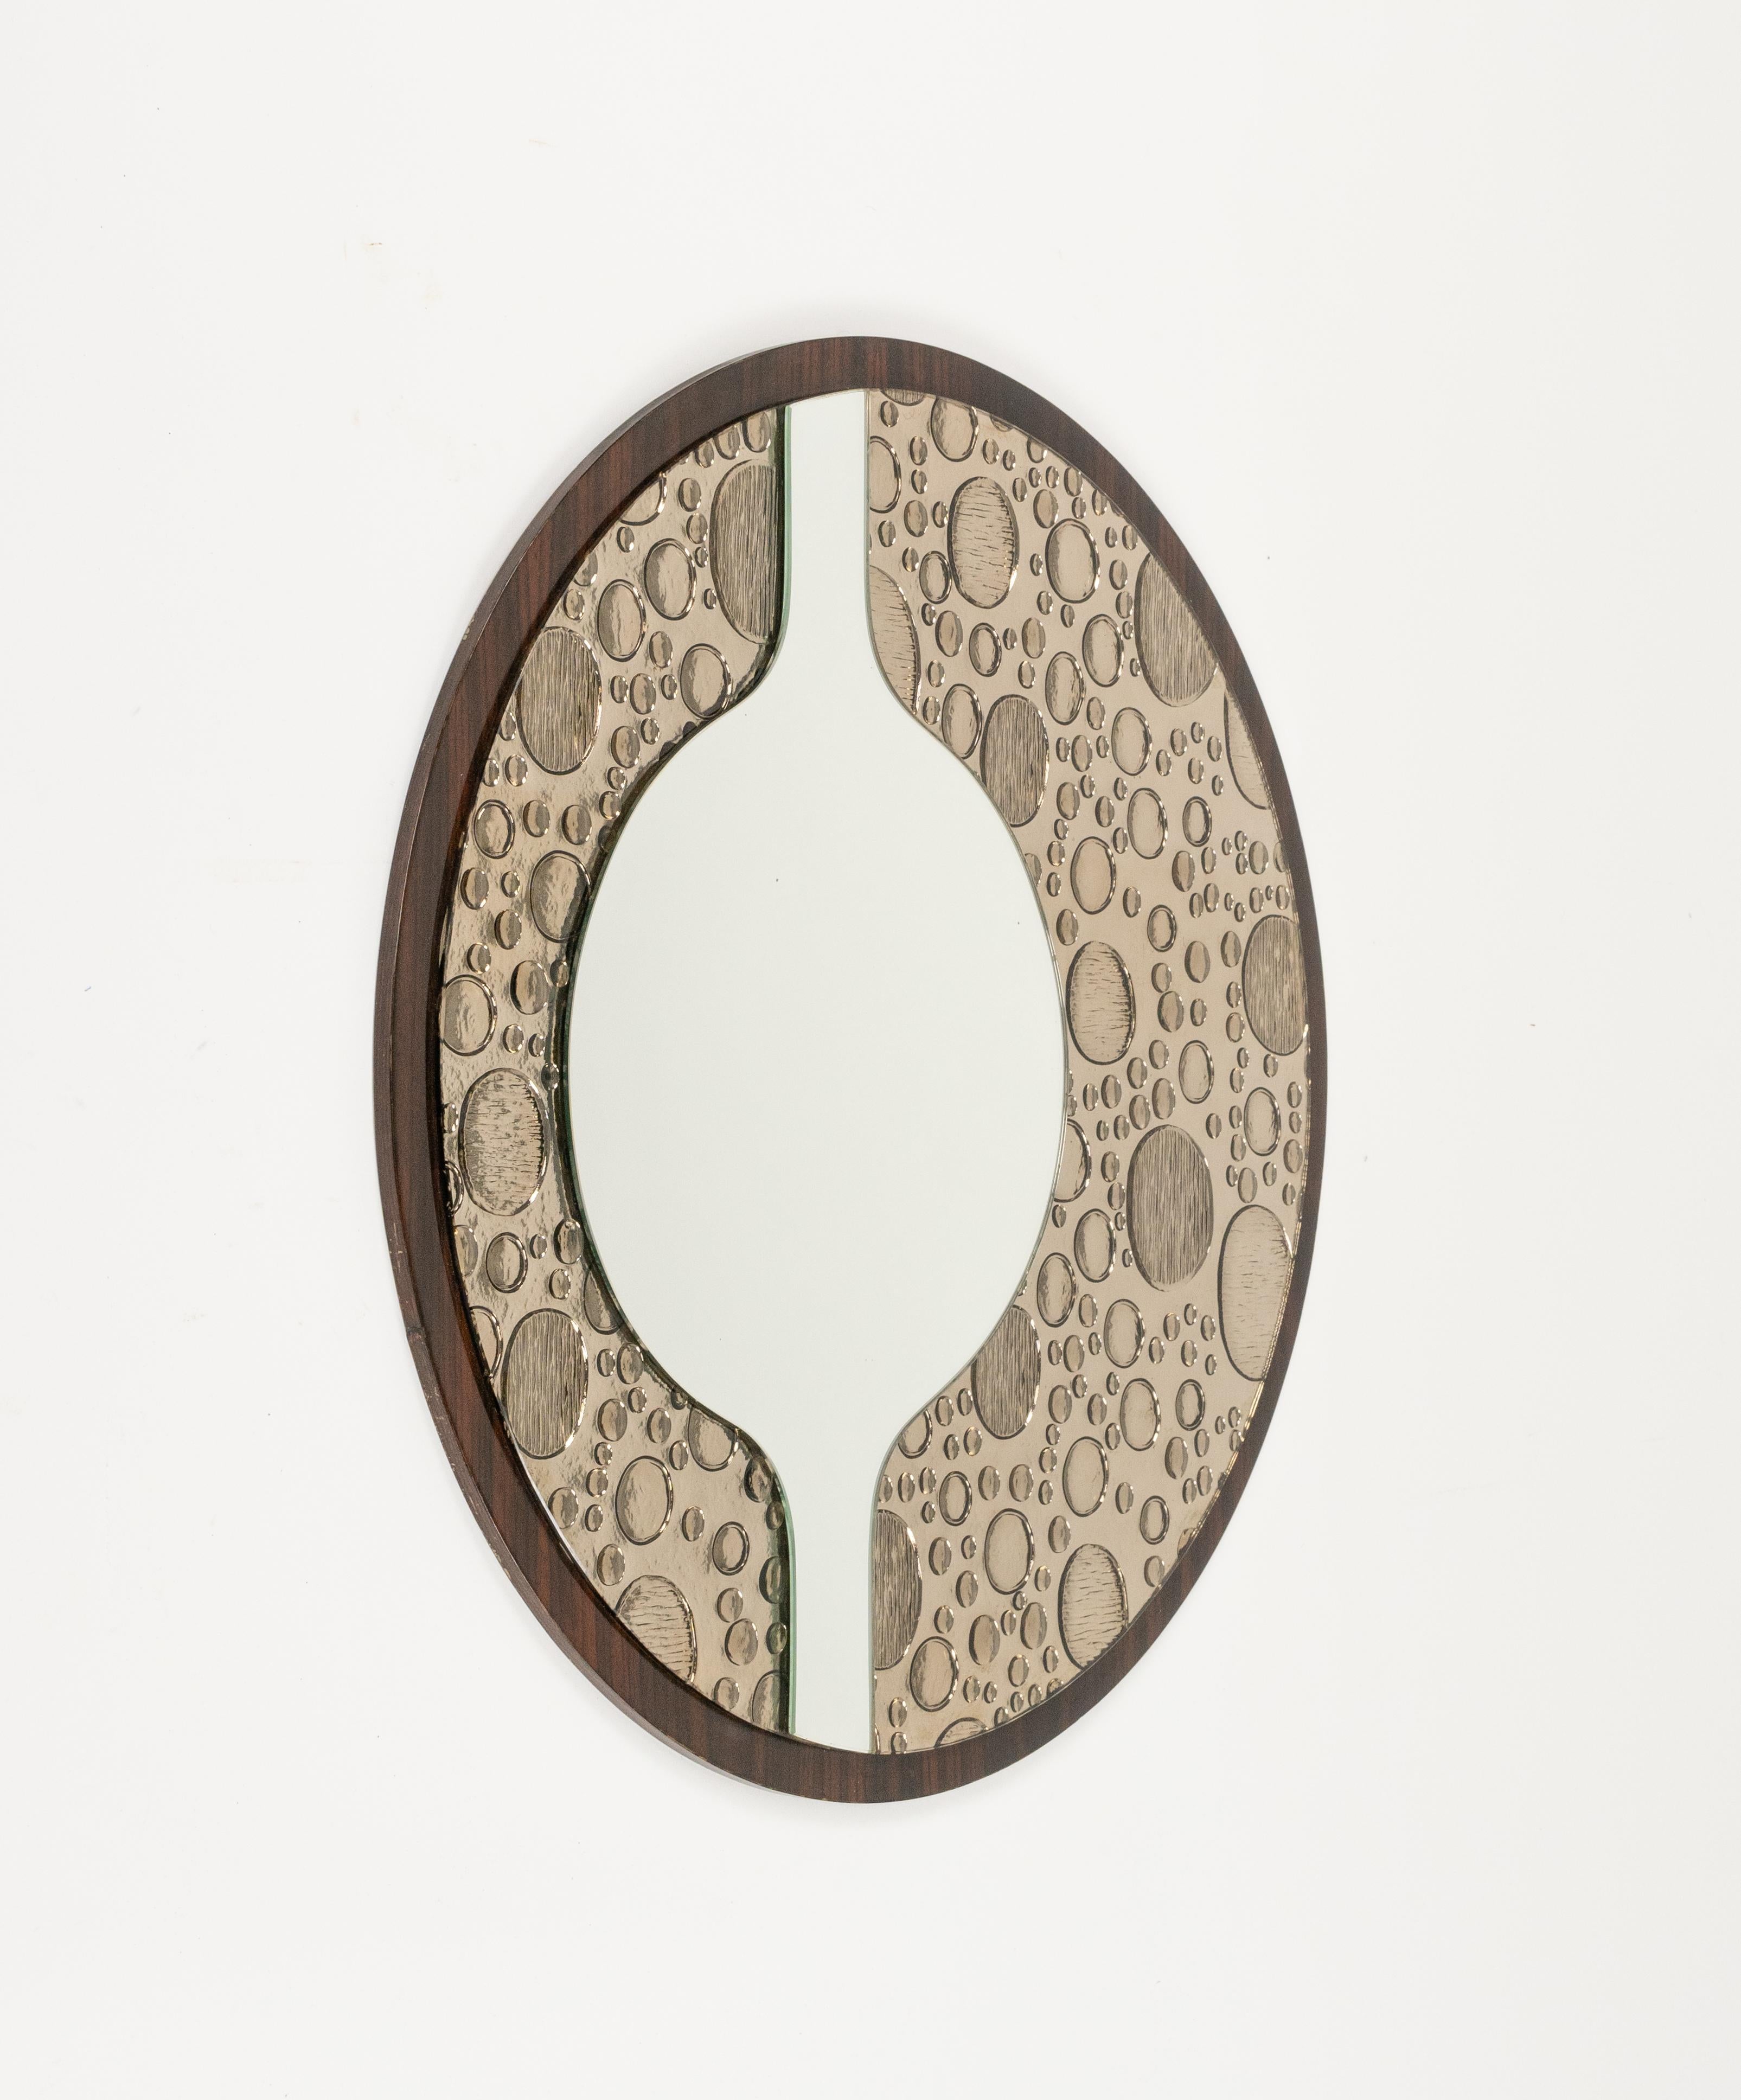 Late 20th Century Midcentury Round Wall Mirror in Wood and Glass, Italy 1970s For Sale